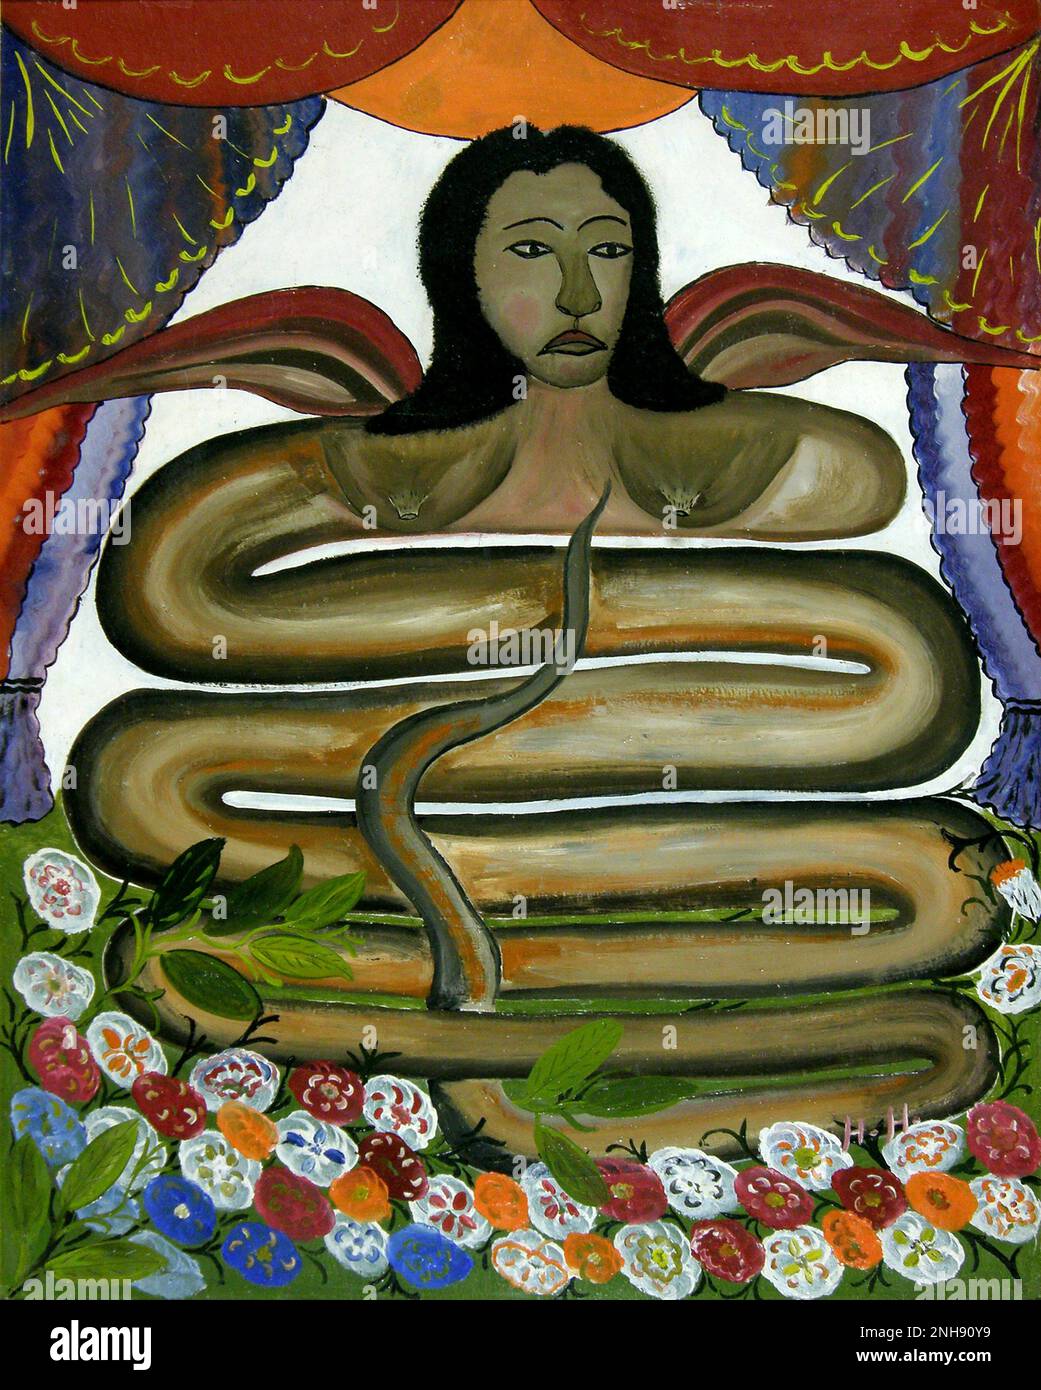 A painting of the lwa Damballa, a serpent, by Haitian artist Hector Hyppolite. Lwa, also called loa or loi, are spirits in the African diasporic religion of Haitian Vodou. Many of the lwa derive their identities in part from deities venerated in the traditional religions of West Africa, especially those of the Fon and Yoruba. Stock Photo